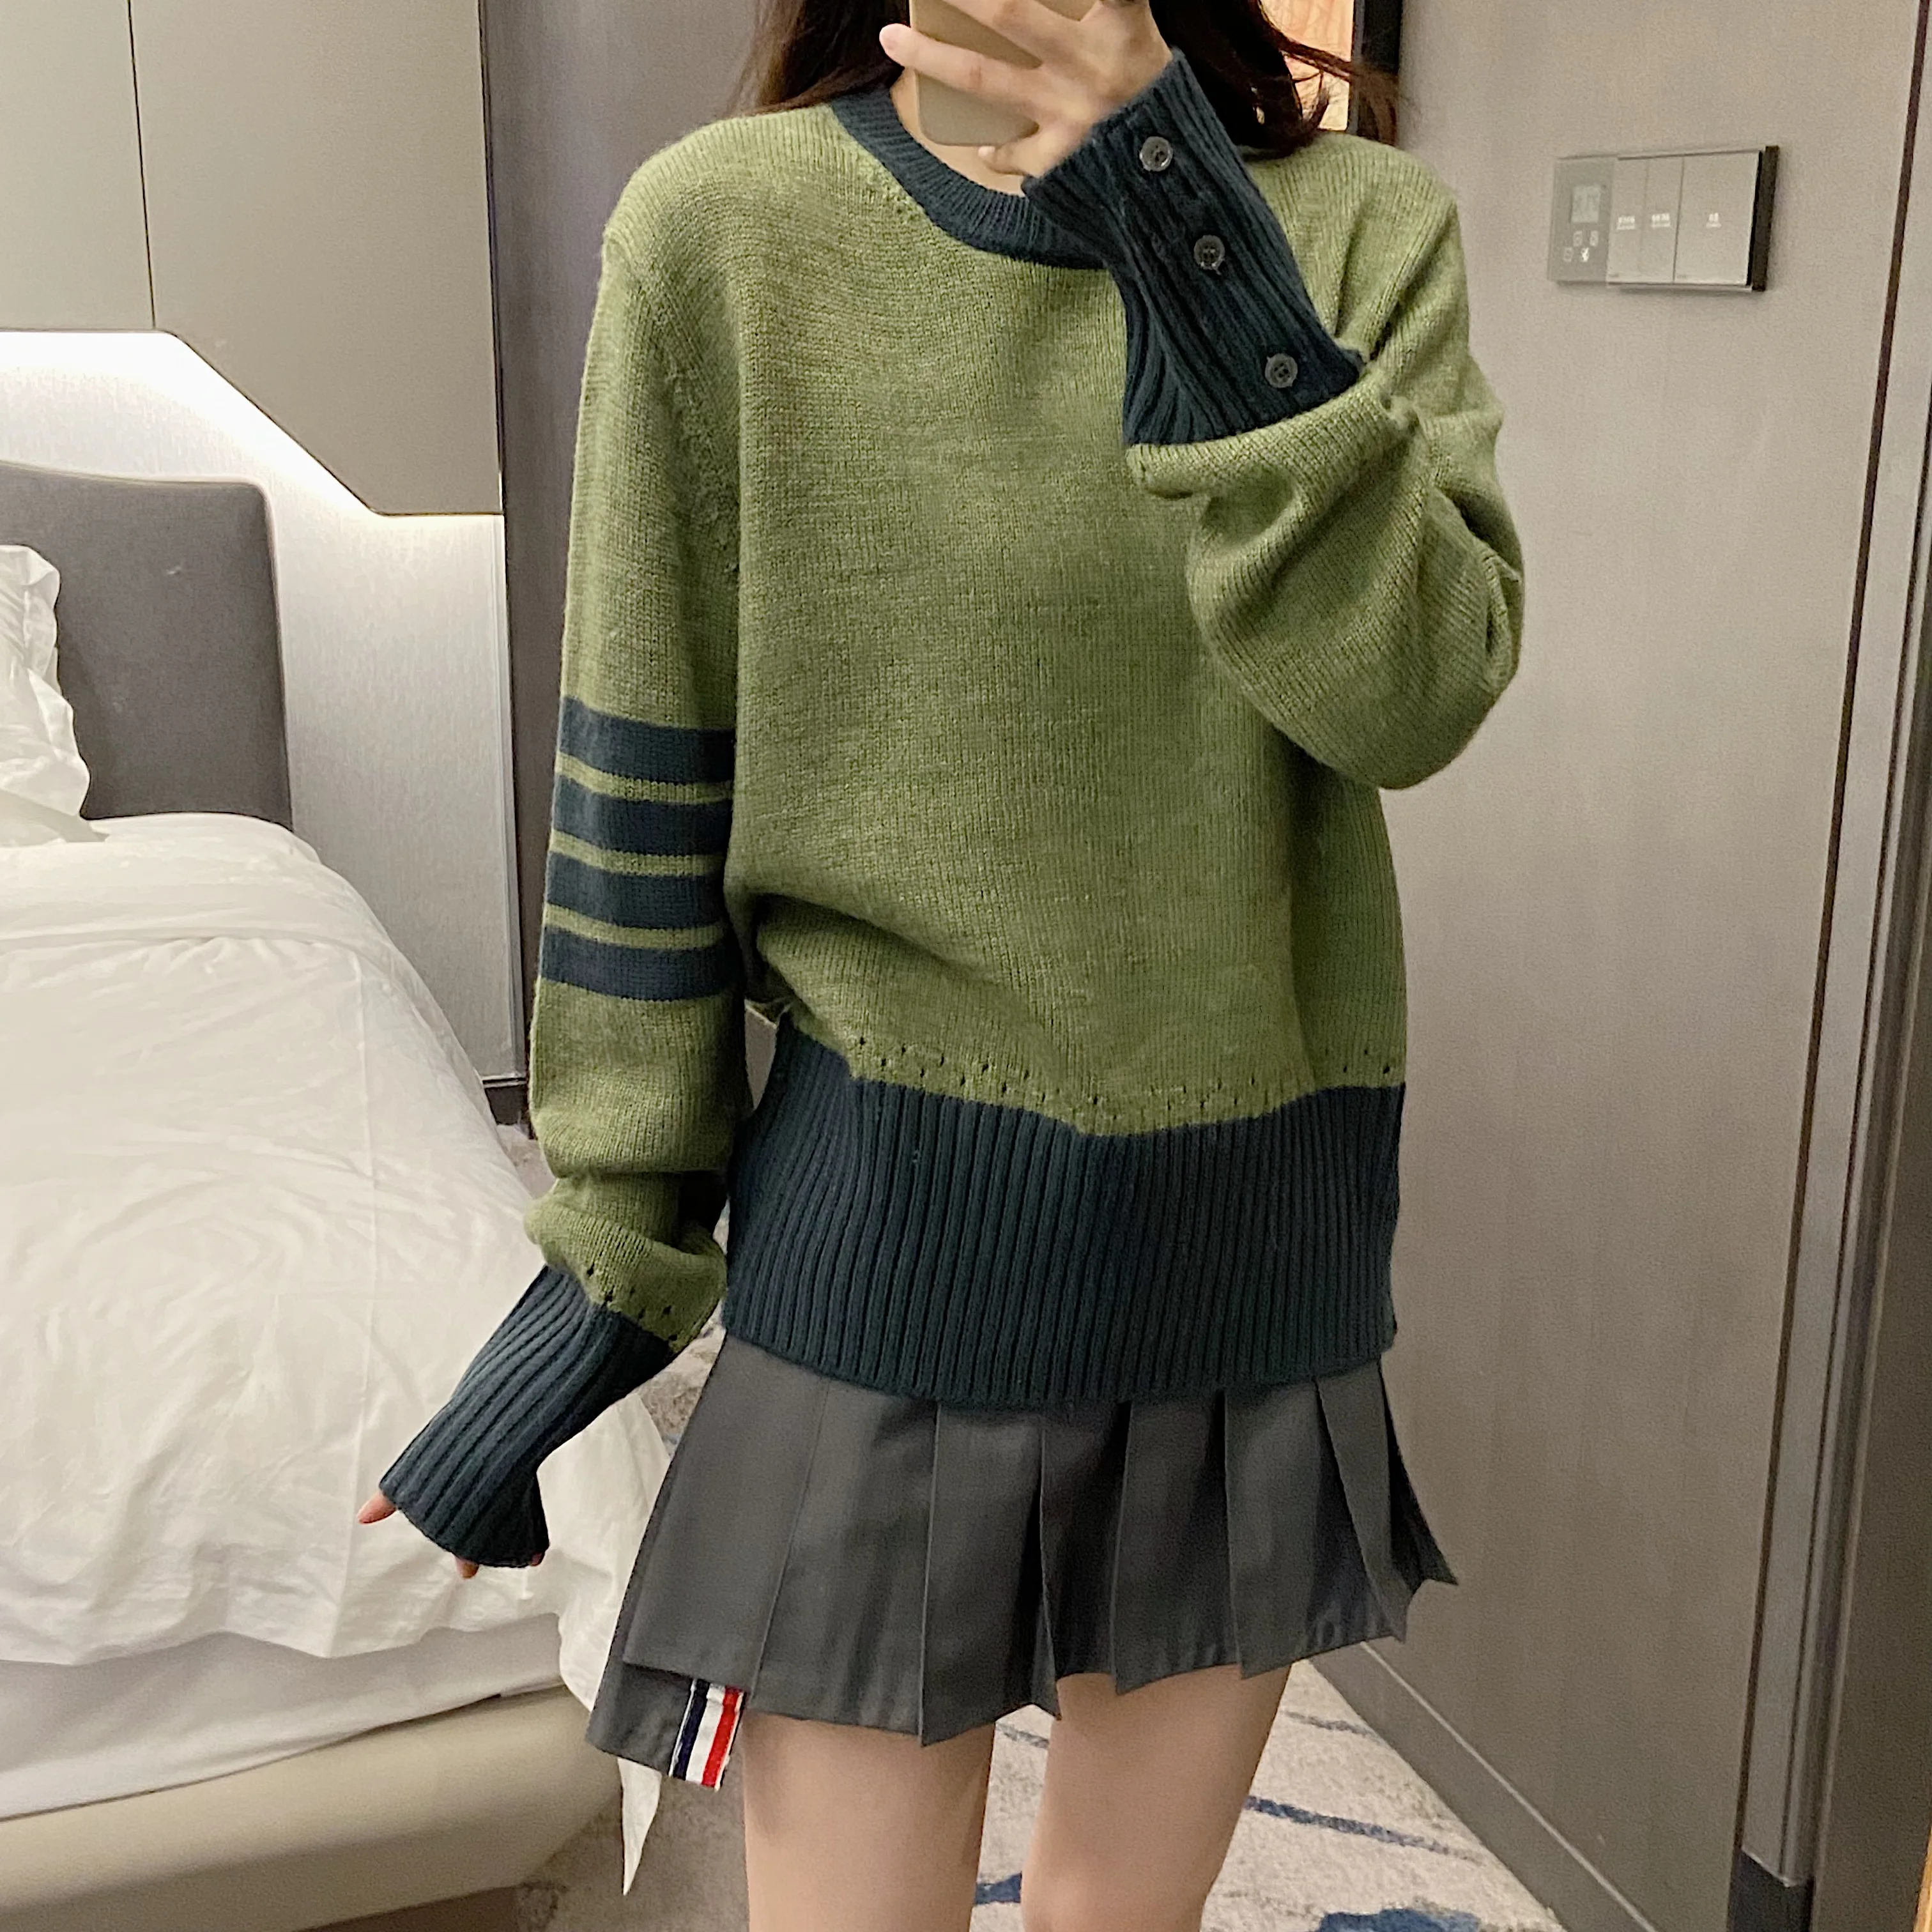 TB High Quality Fashion Women's Four Way Bar Casual Versatile Sweater Crew Neck Pullover Color Contrast Wool Knit Top